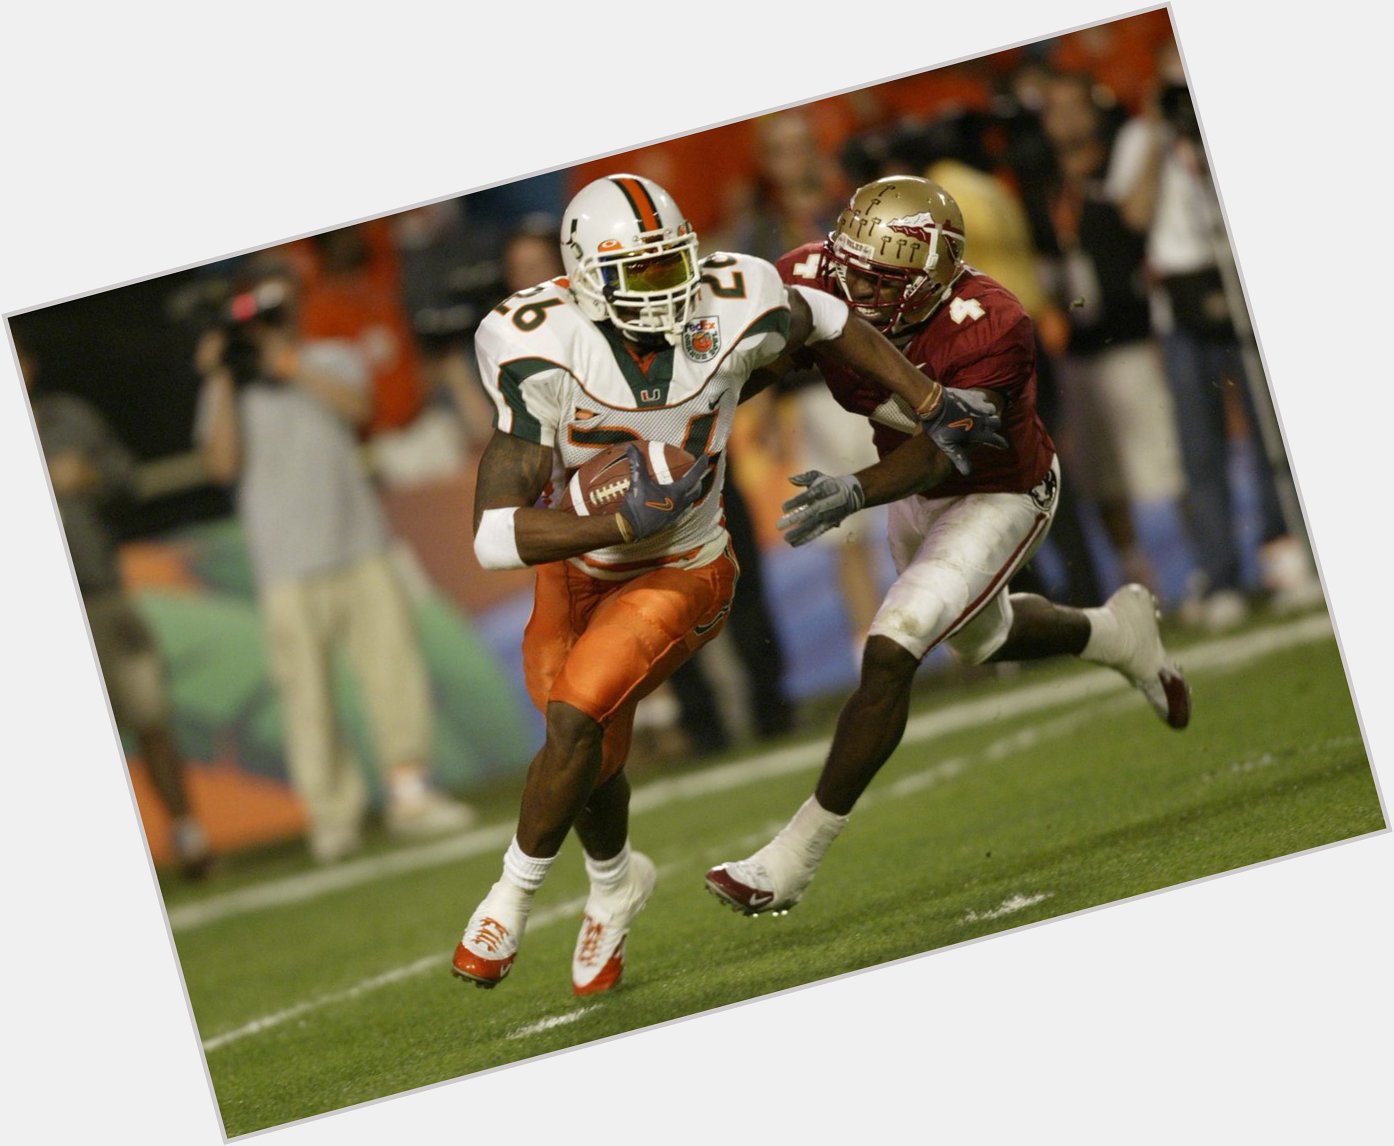 Happy birthday Sean Taylor, rest in paradise and watch over my teams     